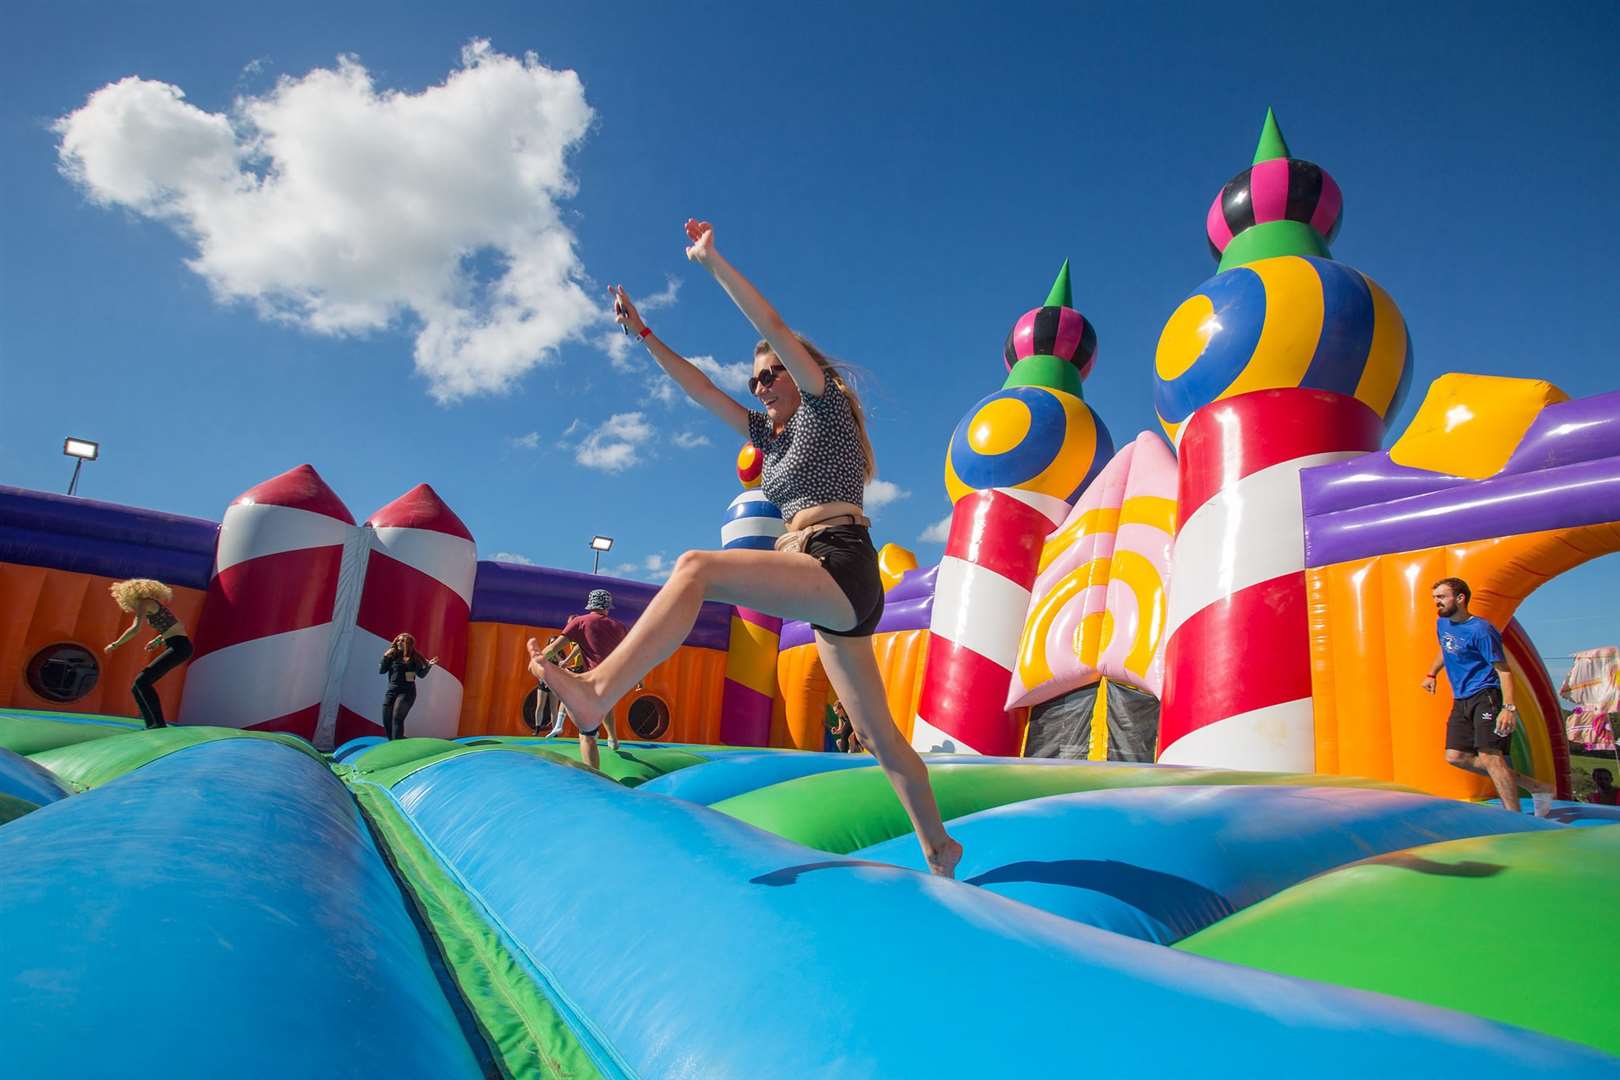 The world's biggest bouncy castle is at Dreamland today